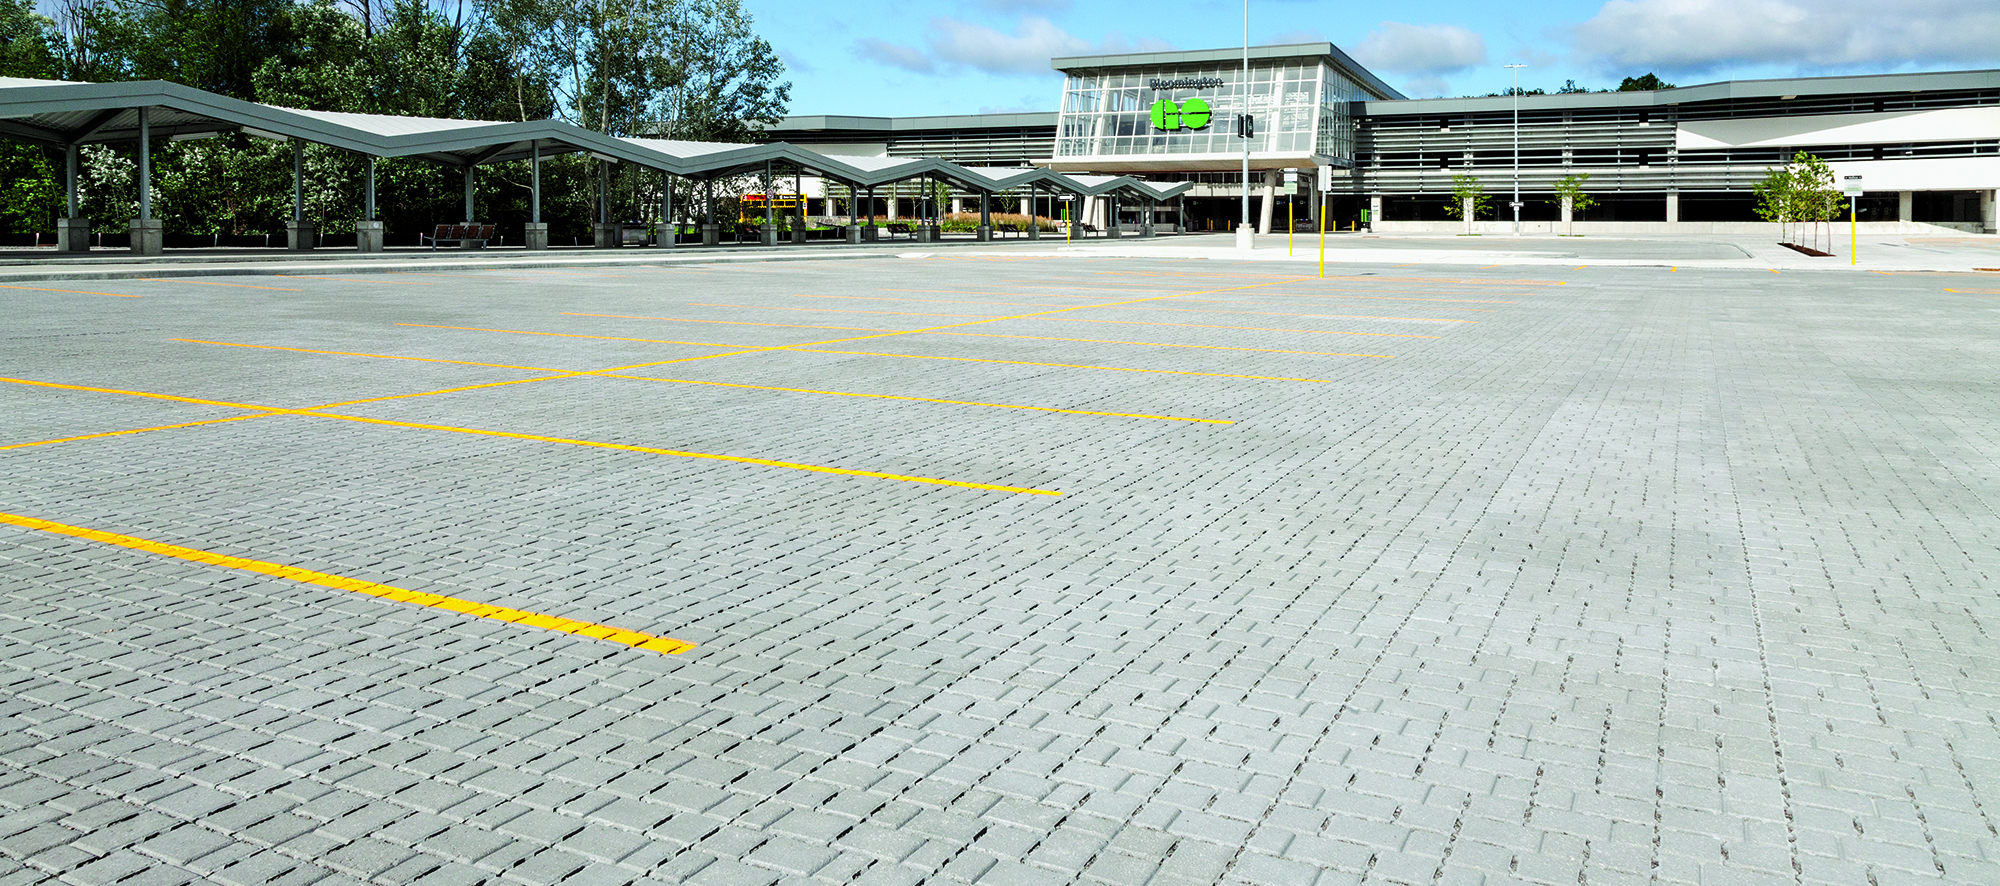 A parking lot paved in grey Eco-Optiloc permeable pavers precedes a glass and cement building with bus bays that says Bloomington GO.